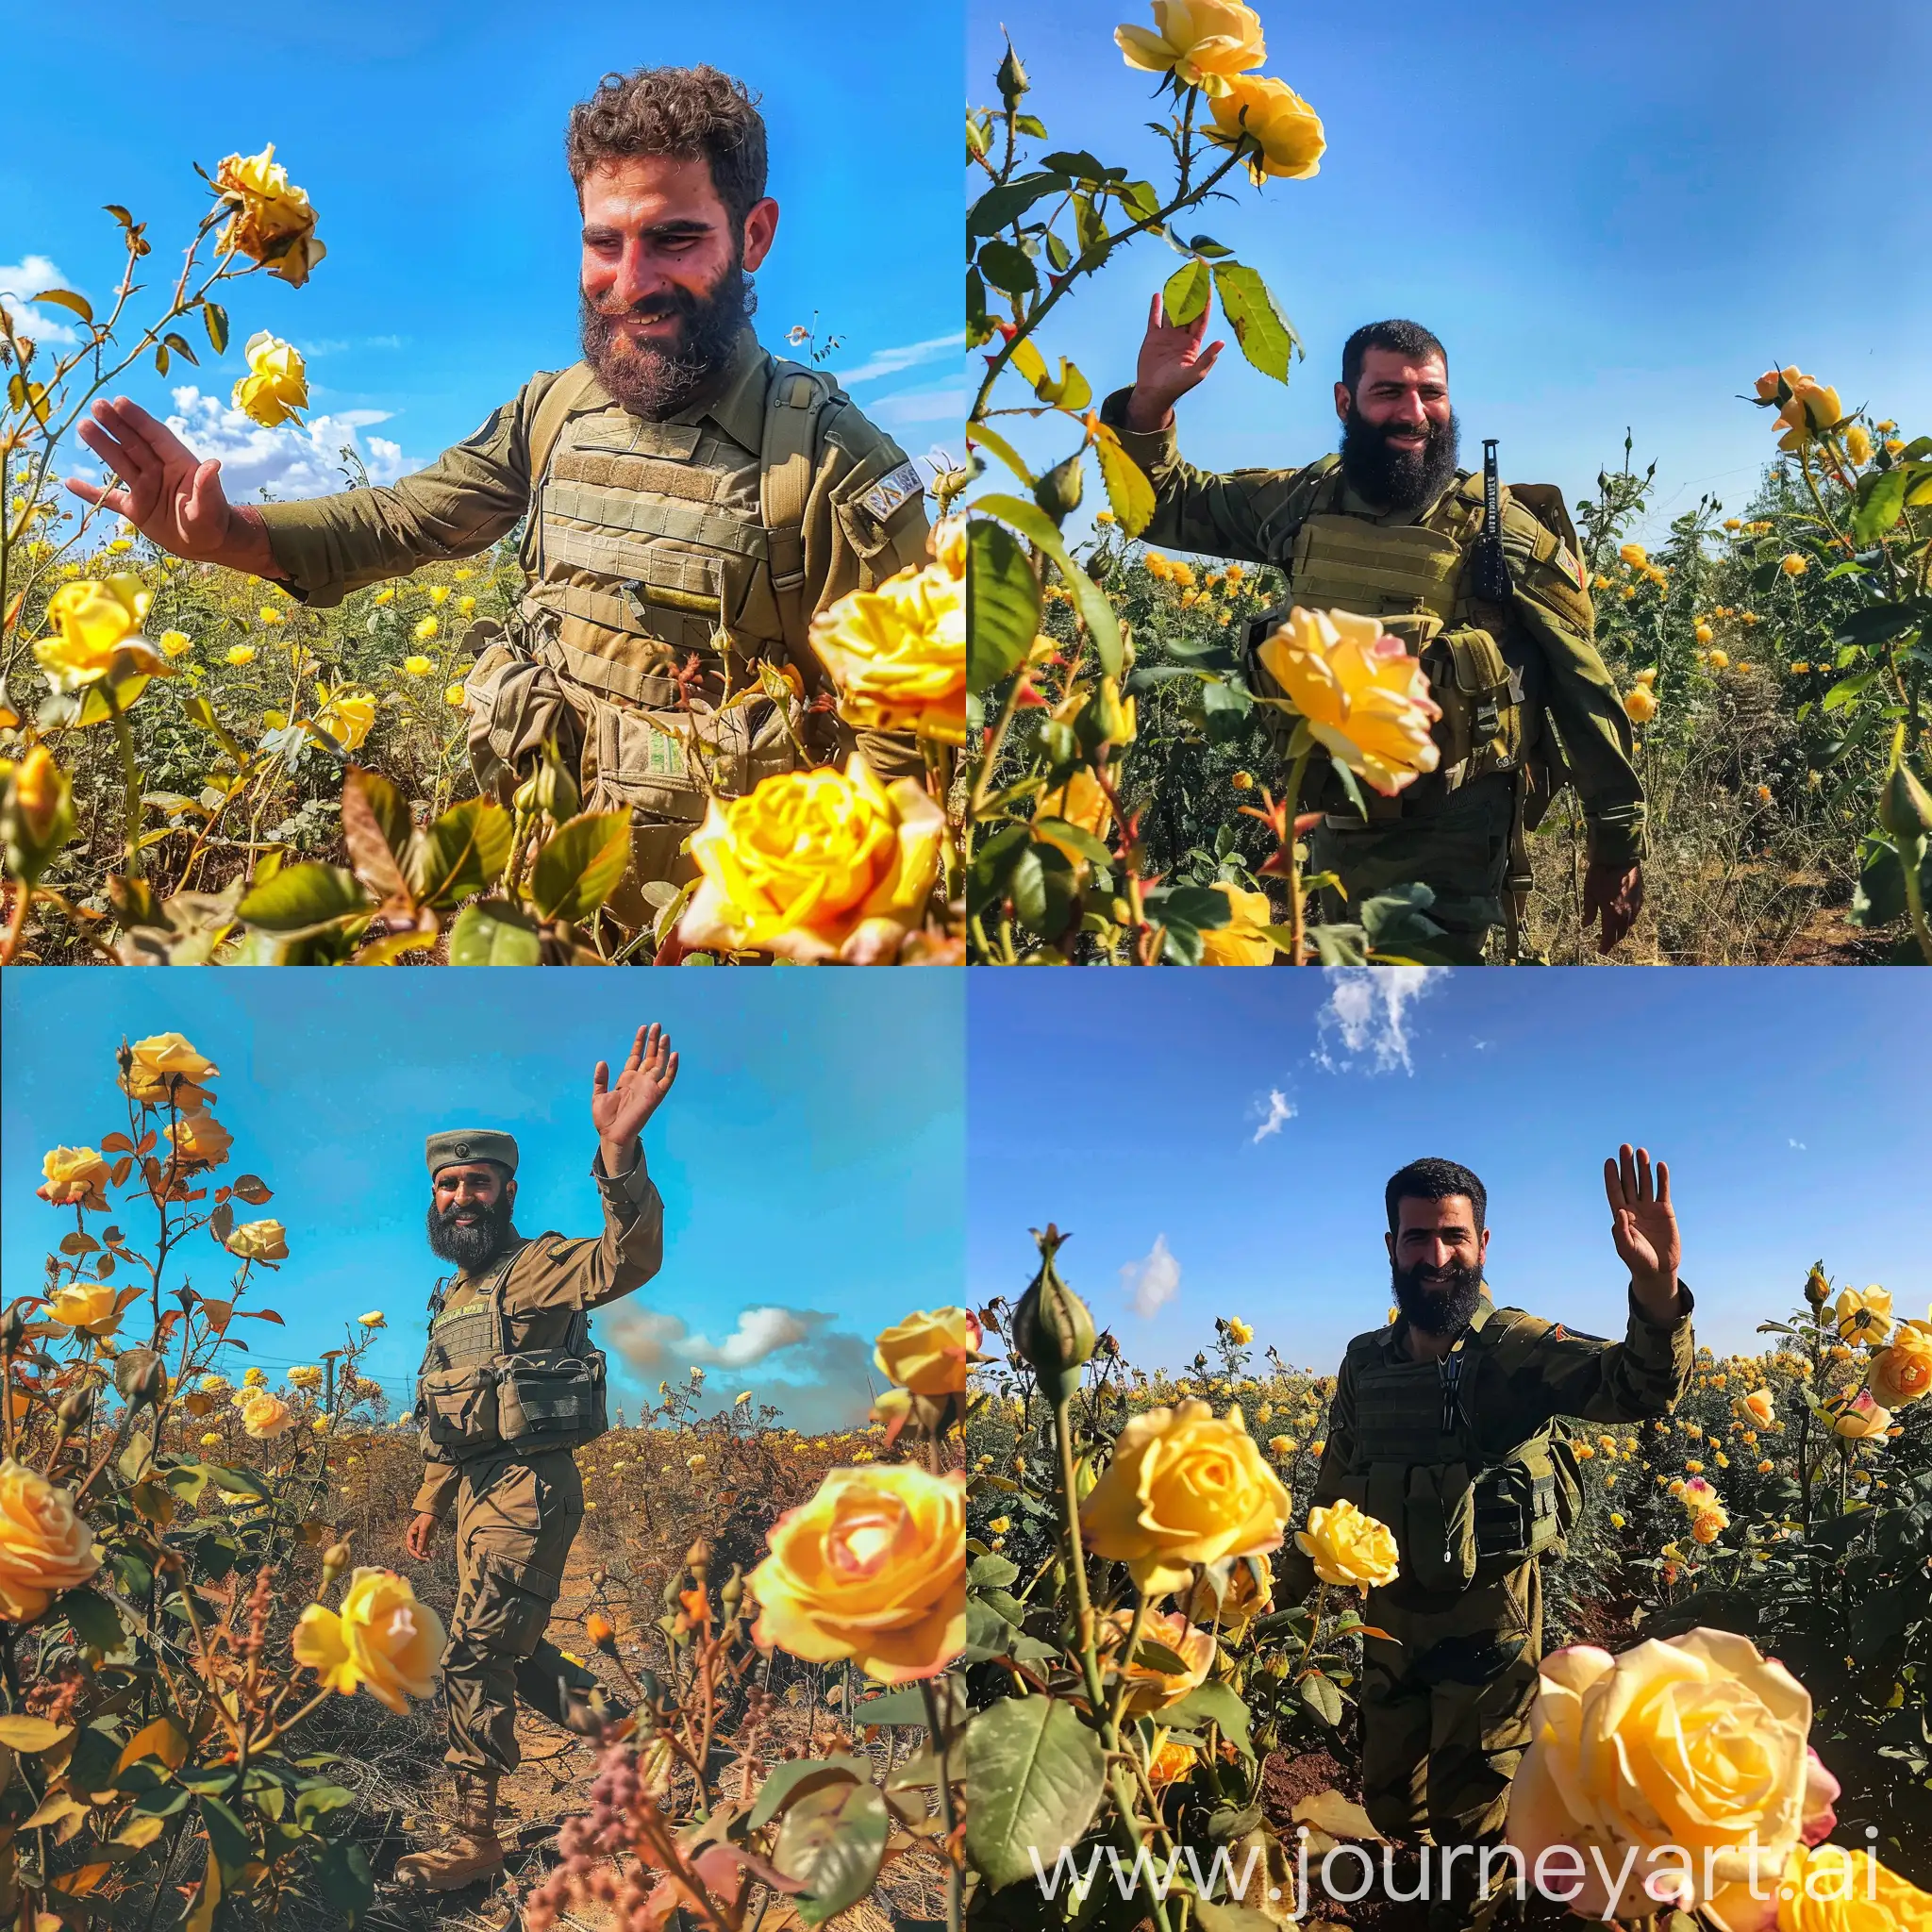 A Hezbollah soldier with a beard, smiling slightly, waving his hand, walking in a field surrounded by yellow roses and a blue sky above him.